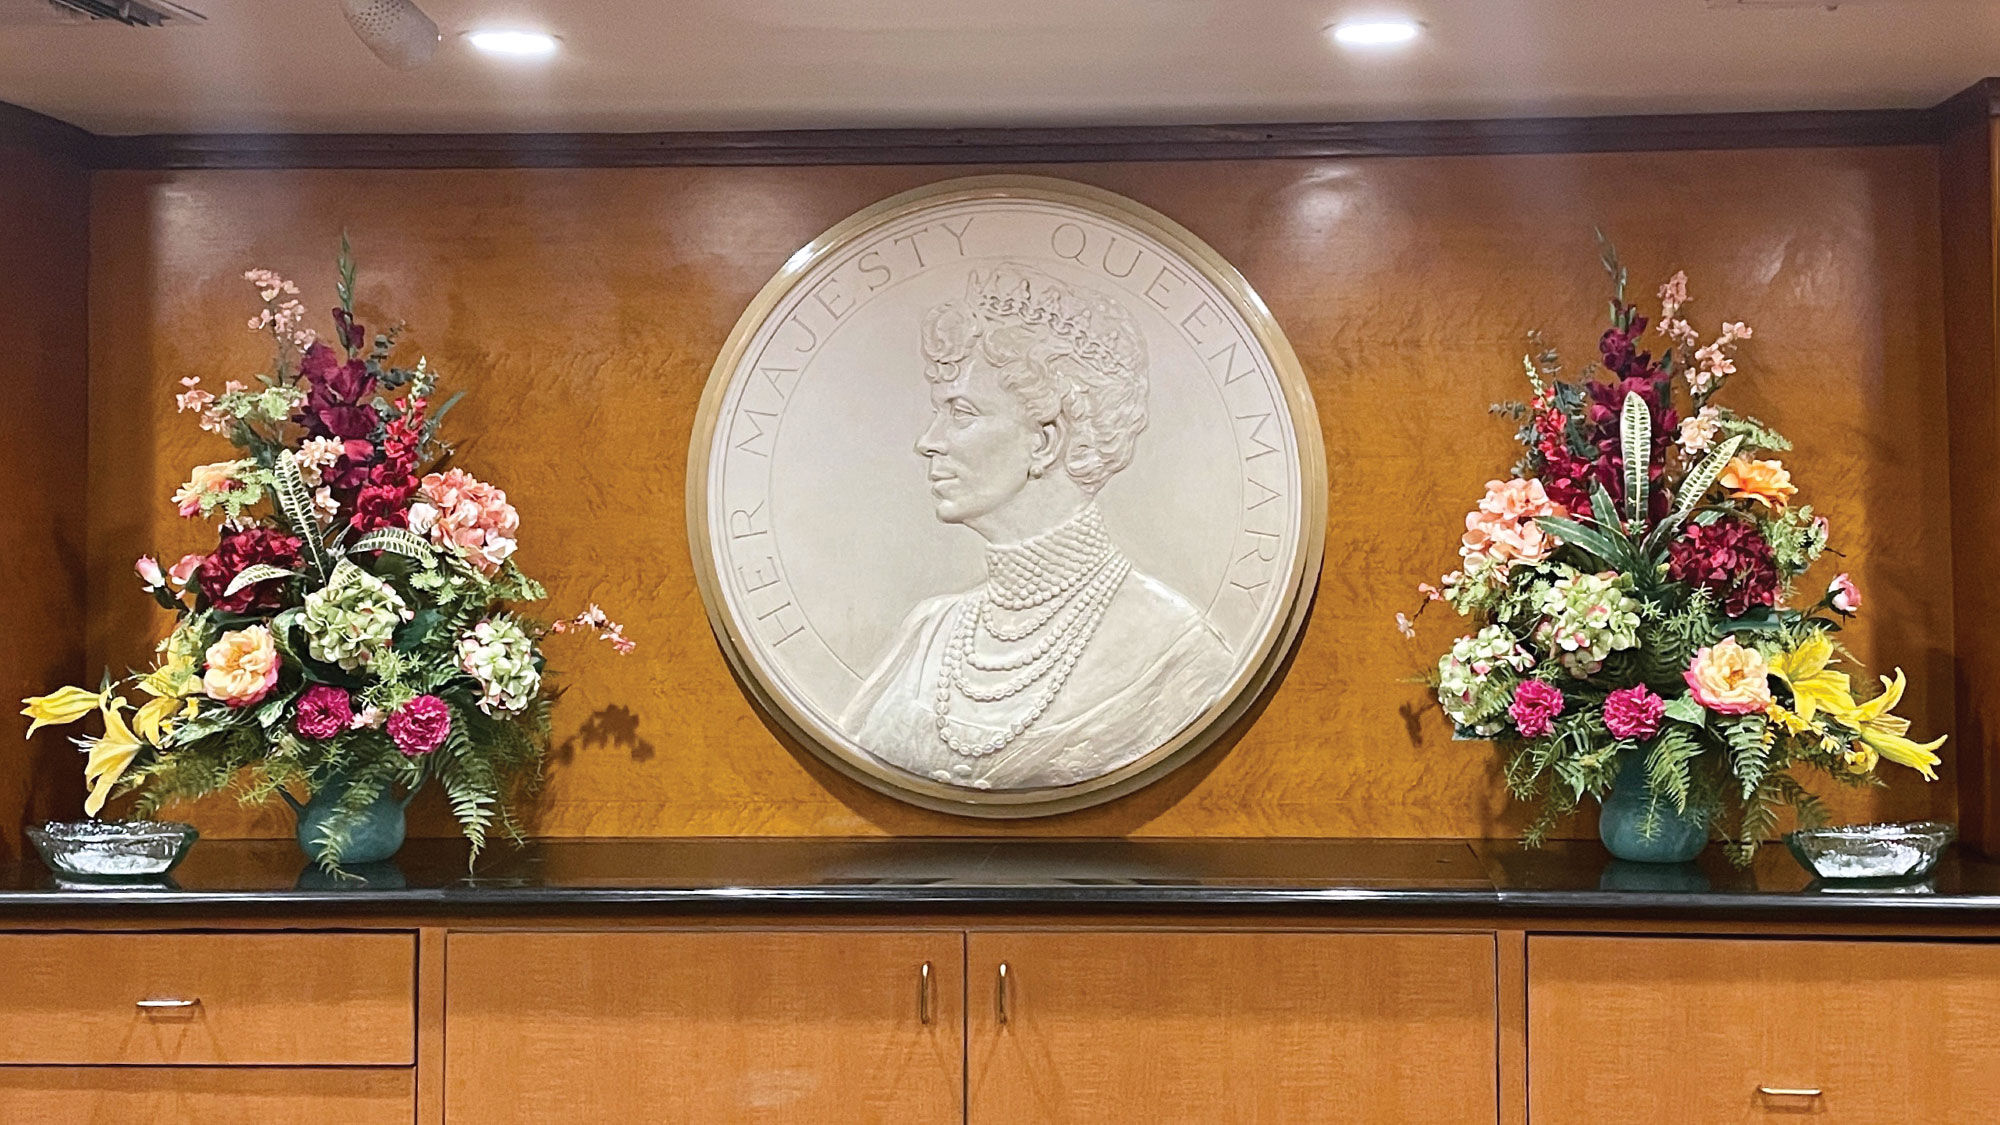 The front desk of the Queen Mary features a portrait of the queen herself.